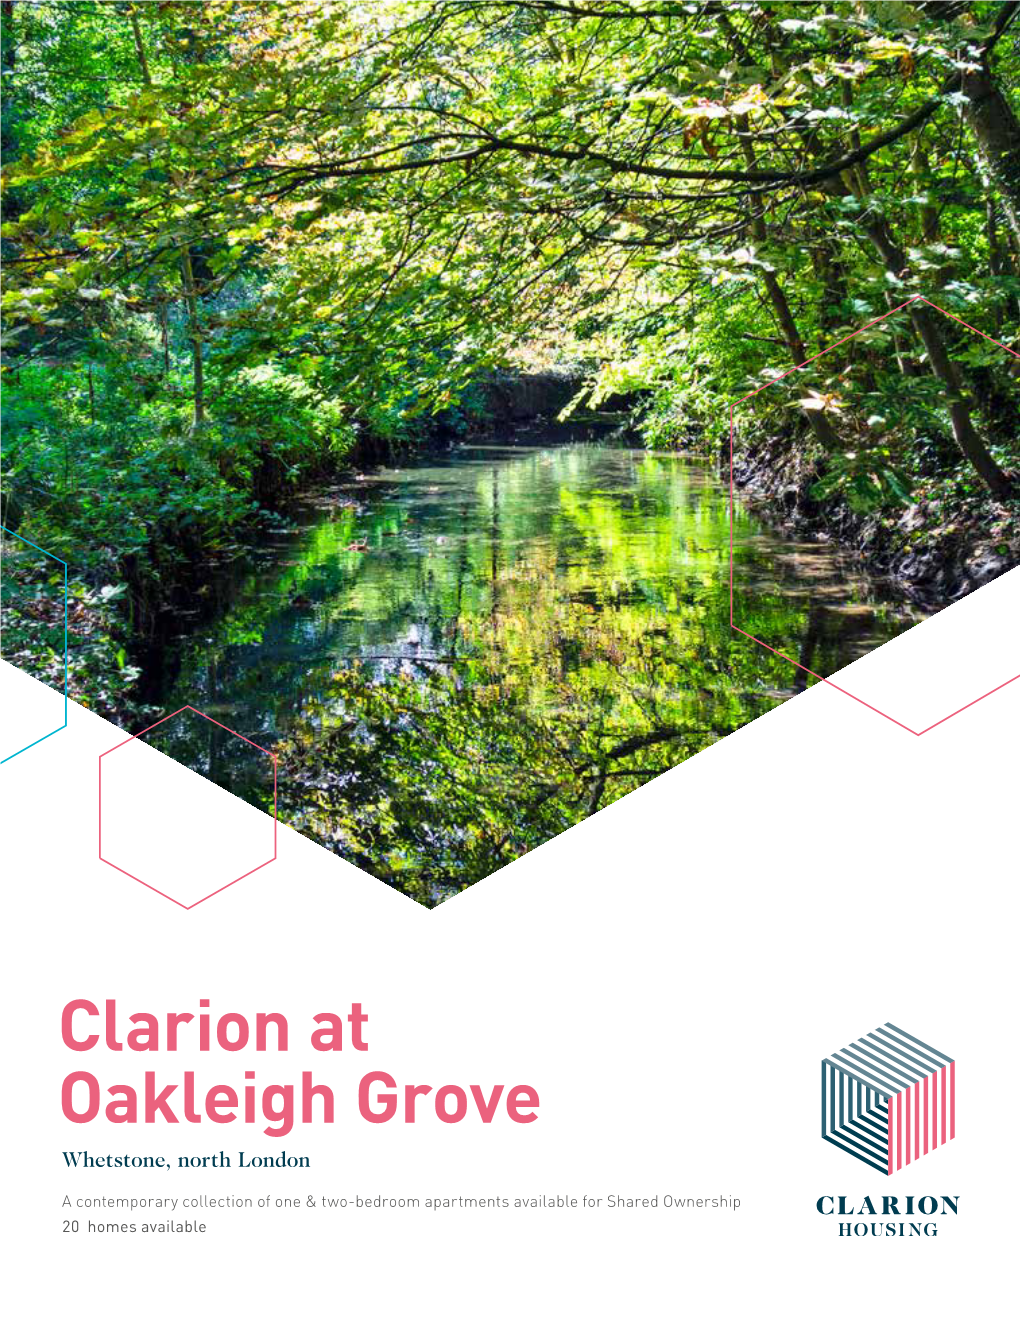 Clarion at Oakleigh Grove Whetstone, North London